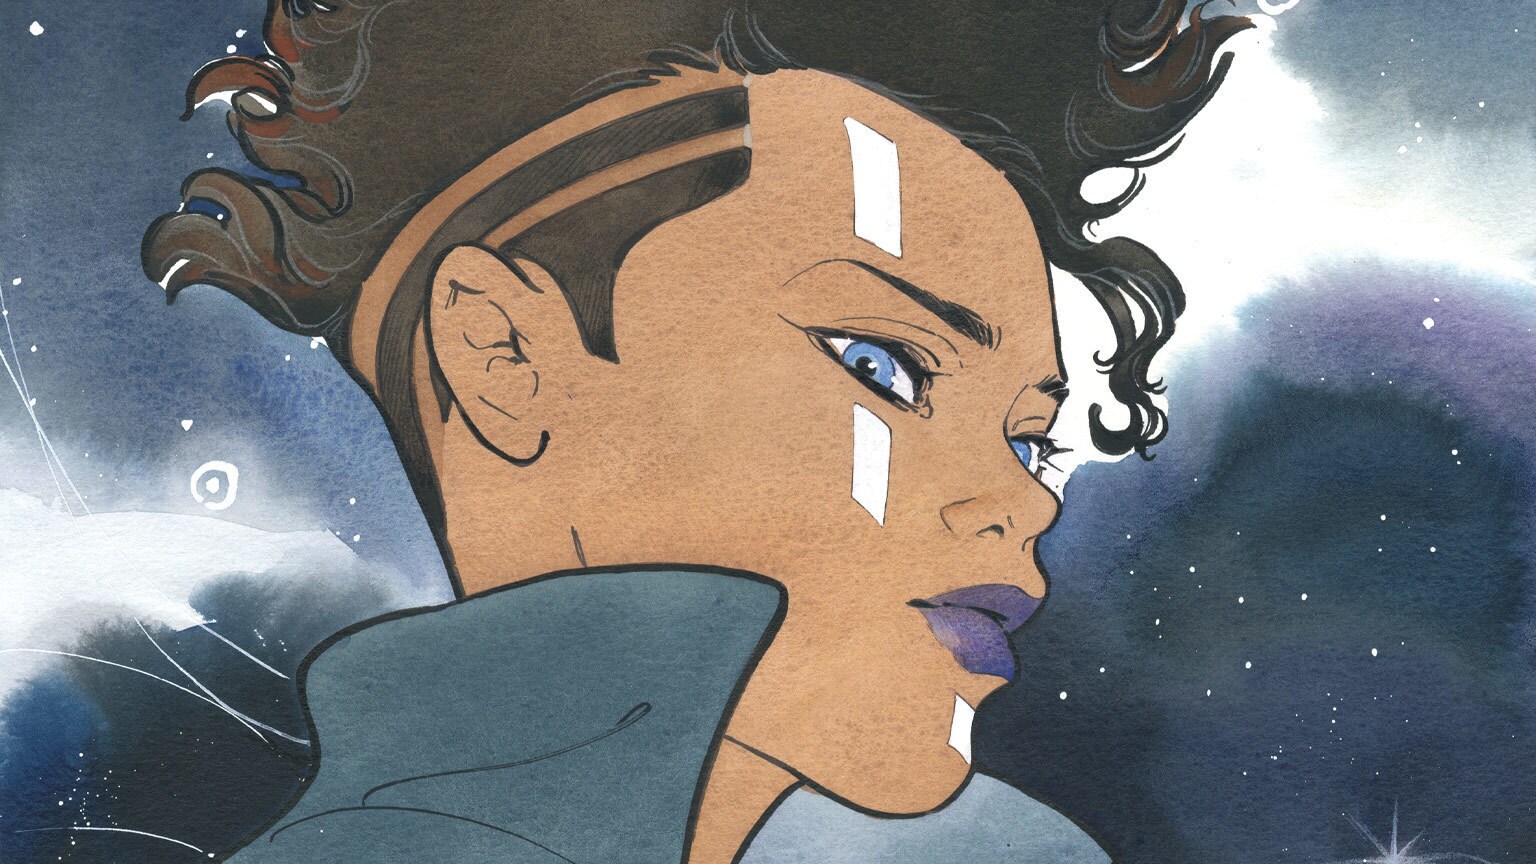 Marvel Comics and Peach Momoko Reveal New Star Wars Women’s History Month Covers – First Look